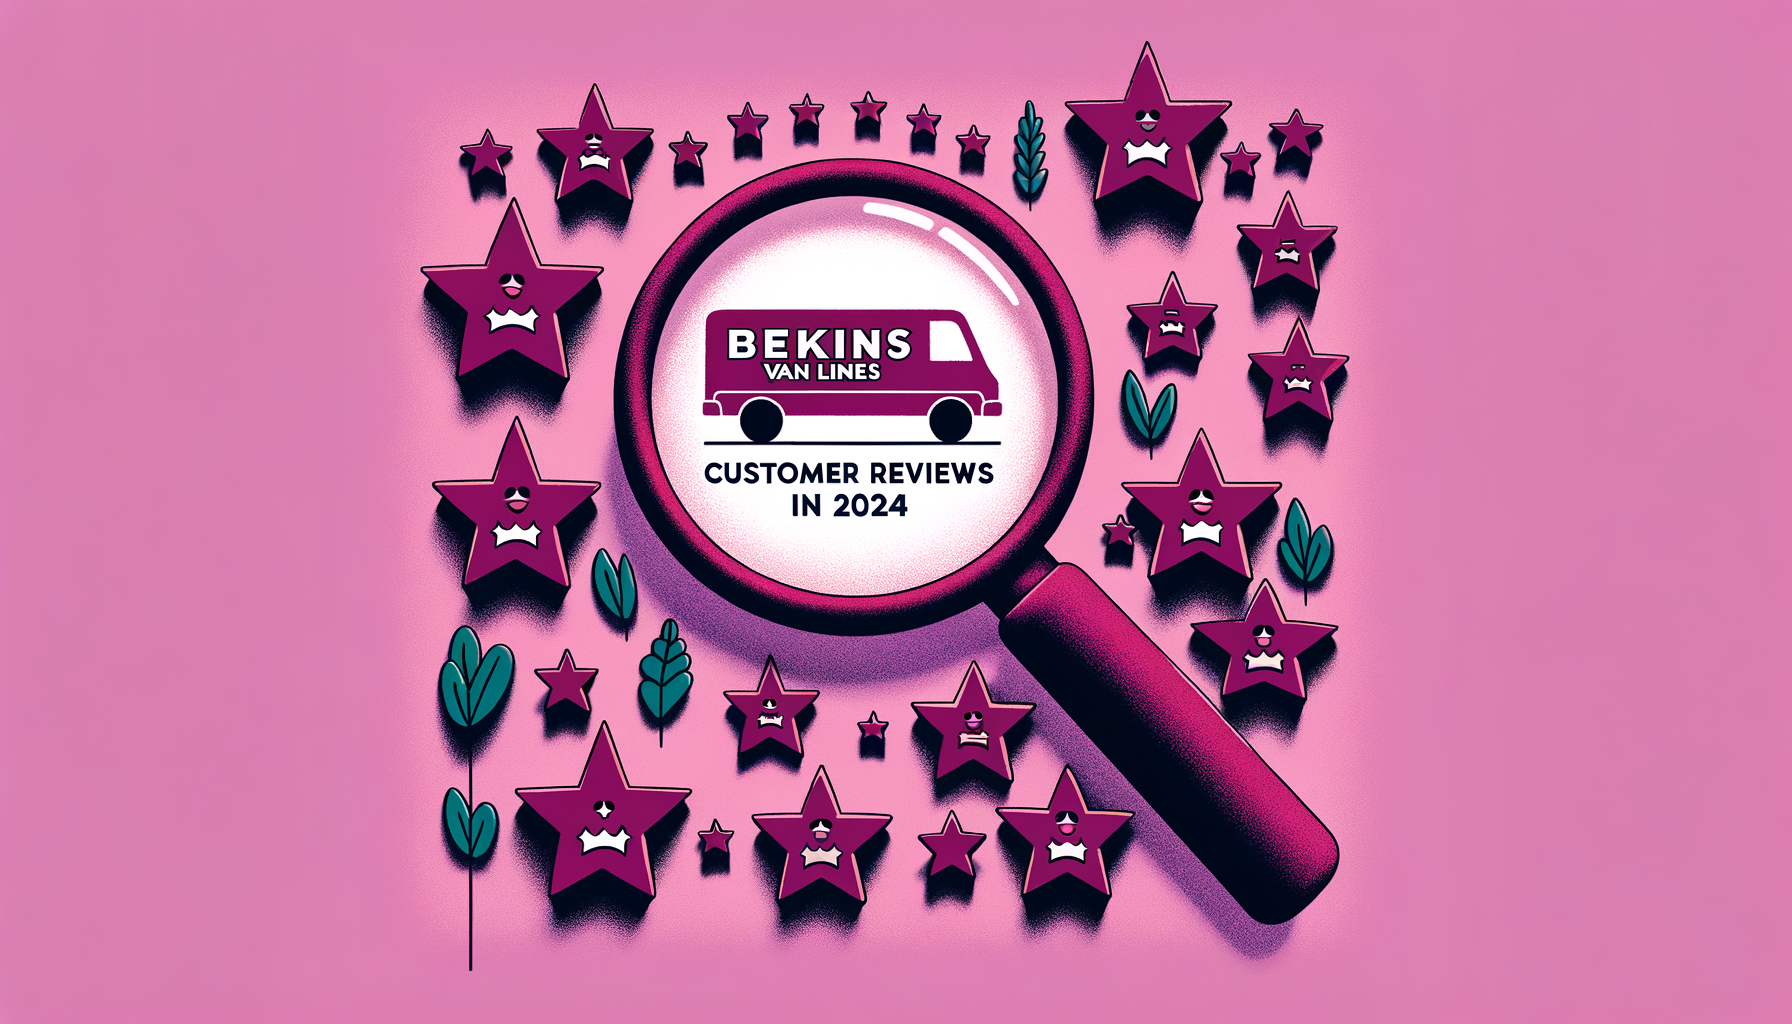 Cartoon illustration of a fuchsia-colored magnifying glass over various customer review stars for Bekins Van Lines, indicating an analysis for the year 2024.